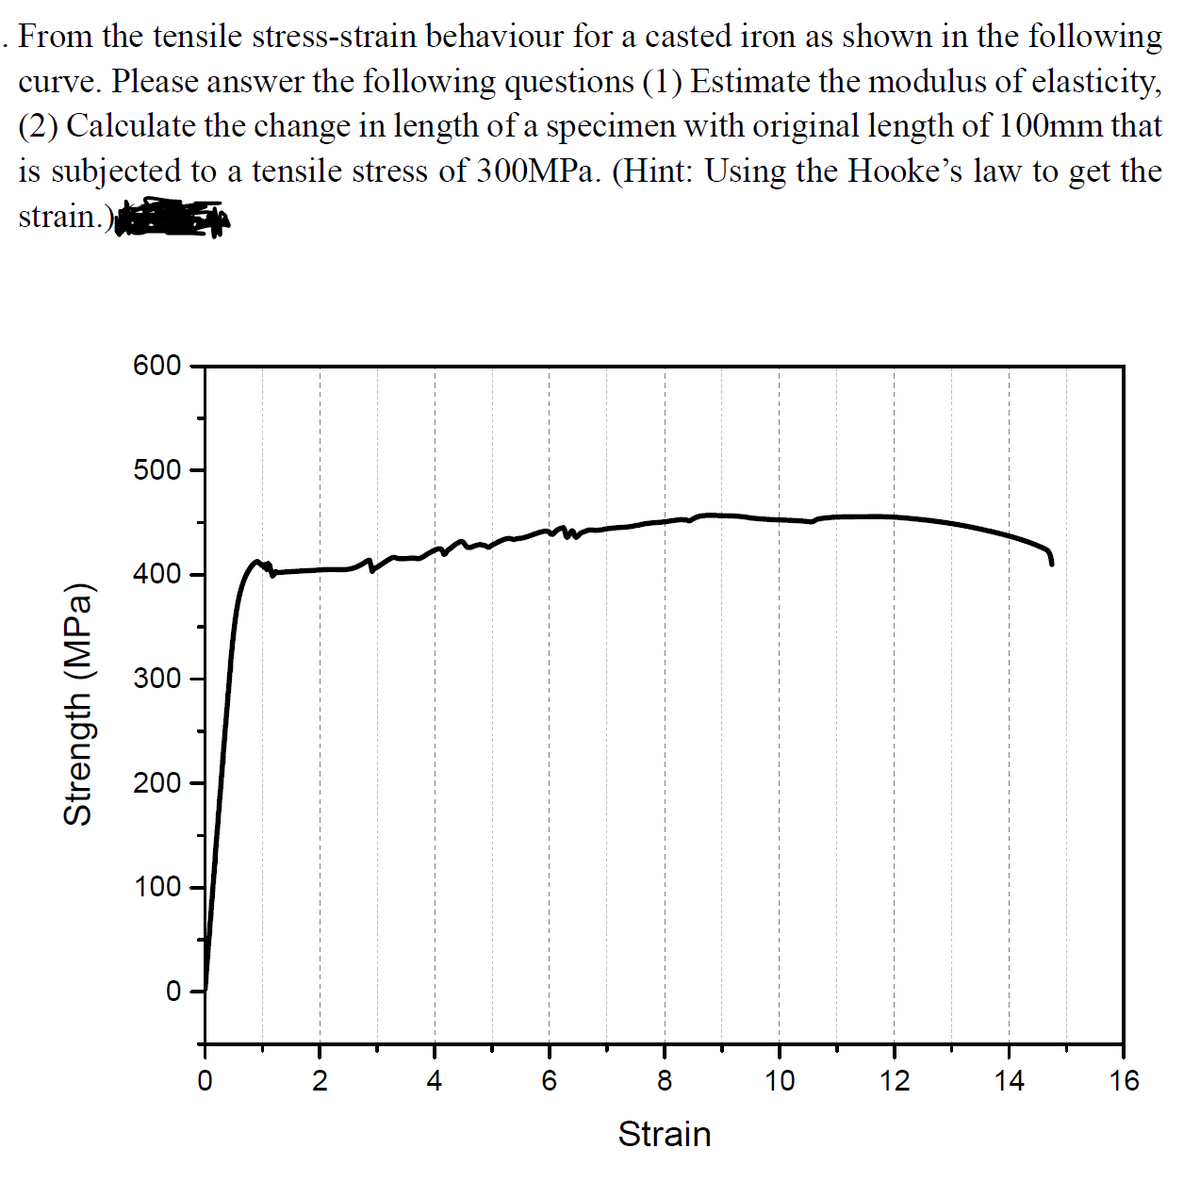 . From the tensile stress-strain behaviour for a casted iron as shown in the following
curve. Please answer the following questions (1) Estimate the modulus of elasticity,
(2) Calculate the change in length of a specimen with original length of 100mm that
is subjected to a tensile stress of 300MPa. (Hint: Using the Hooke's law to get the
strain.)
600
500
400 -
300 -
200 -
100 -
2
4
6.
8
10
12
14
16
Strain
Strength (MPa)
